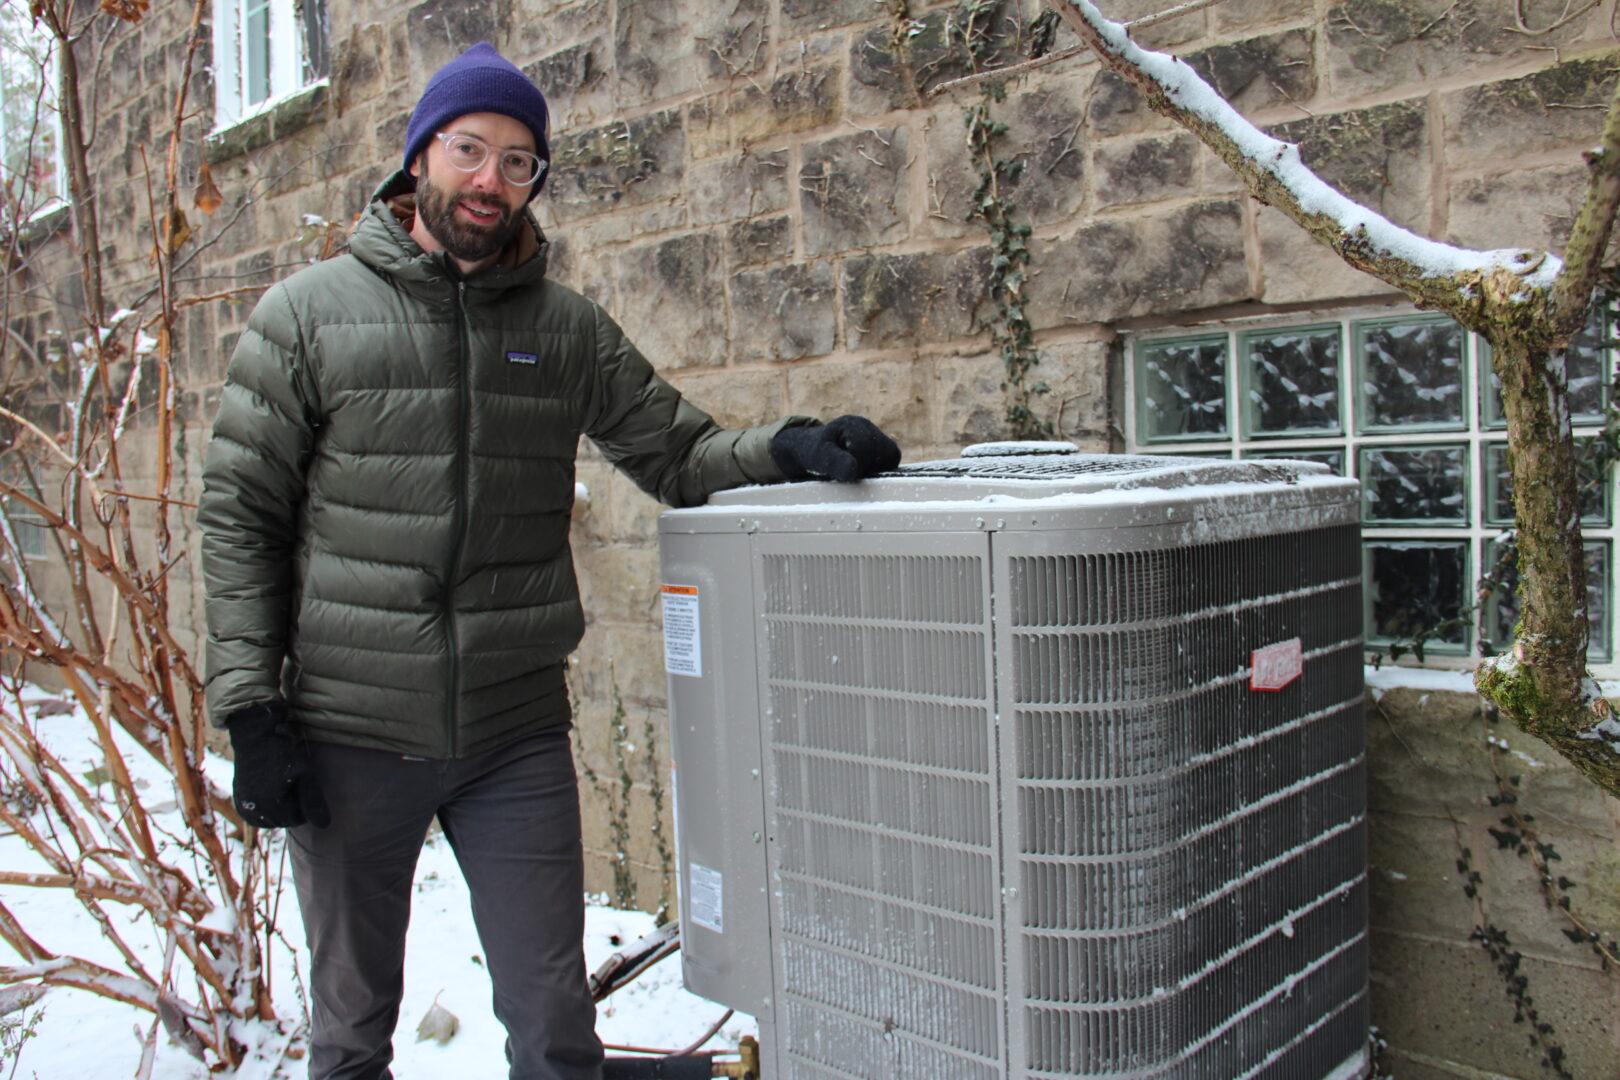 Air To Water Heat Pumps - Domestic Use - Easy Air Conditioning